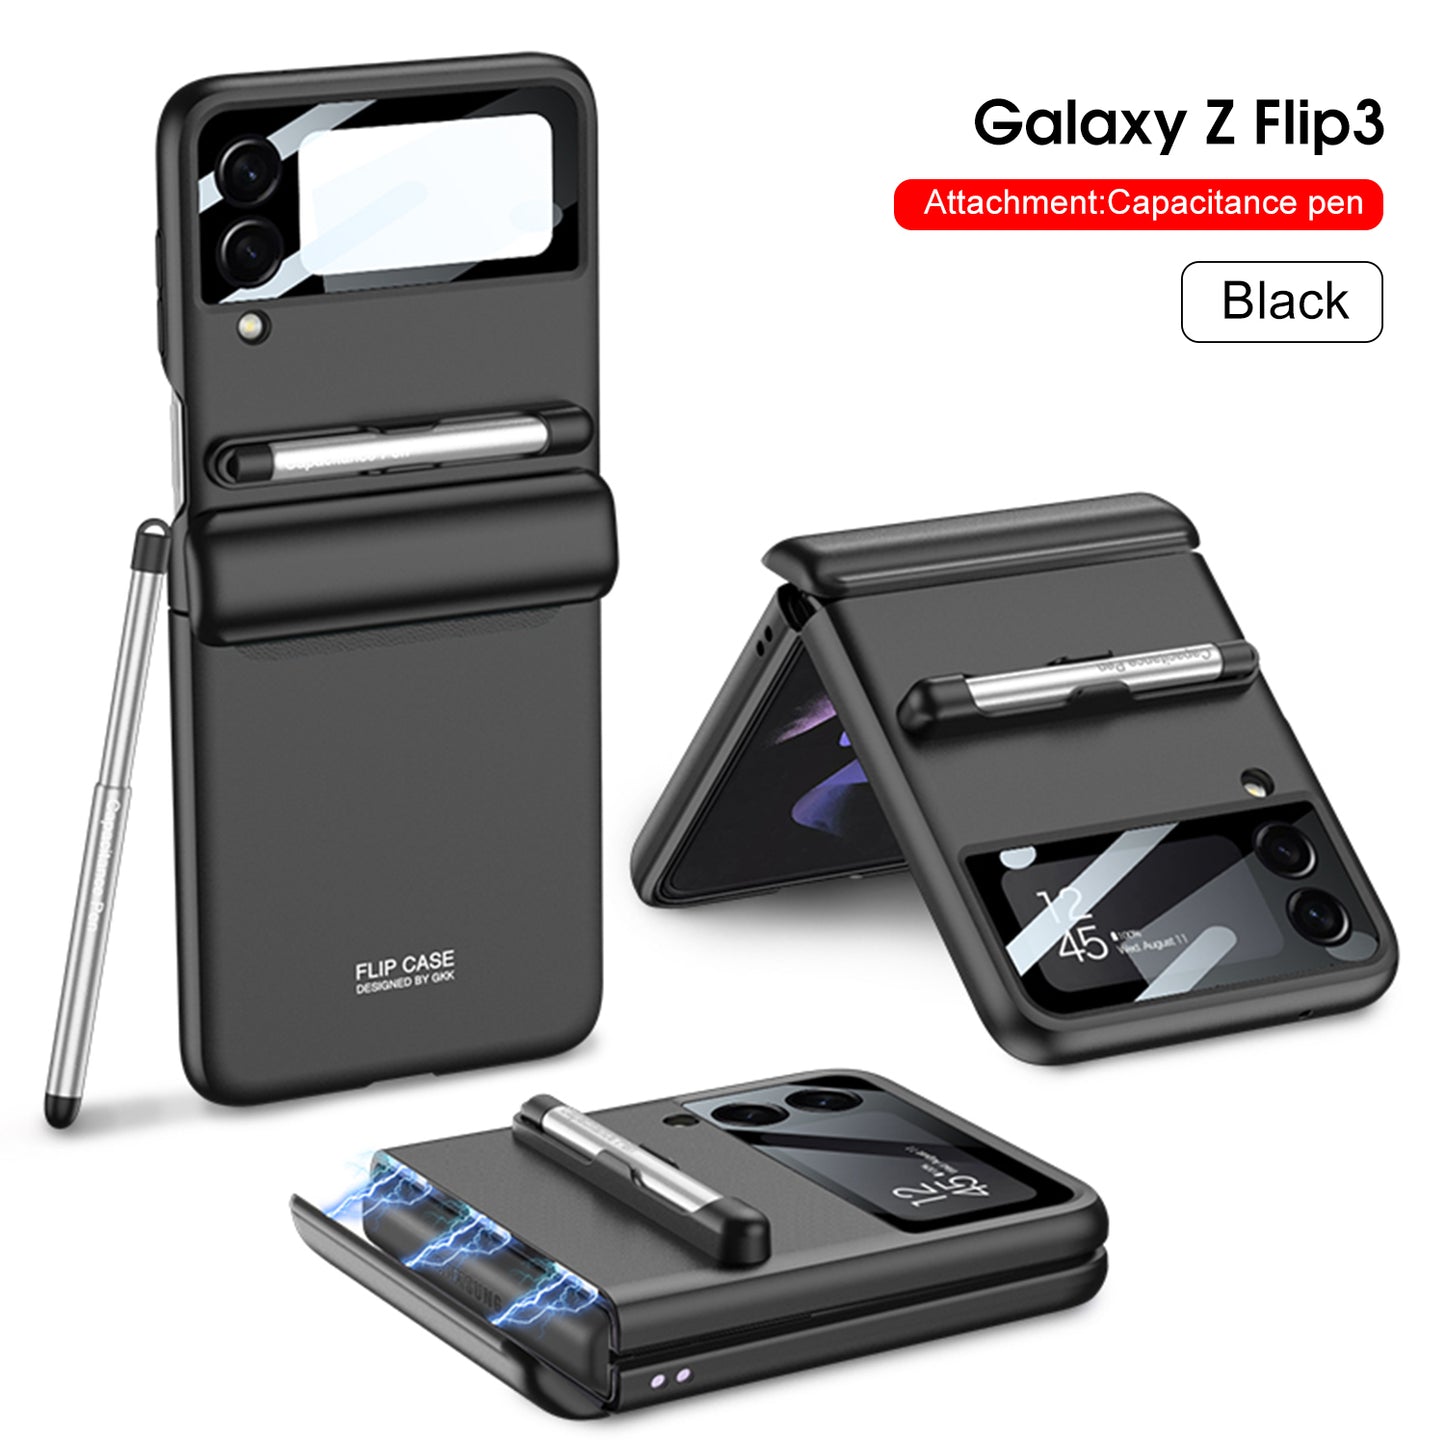 2022 Magnetic All-included Shockproof Plastic Hard Cover For Samsung Galaxy Z Flip 3 5G - {{ shop_name}} varyfun